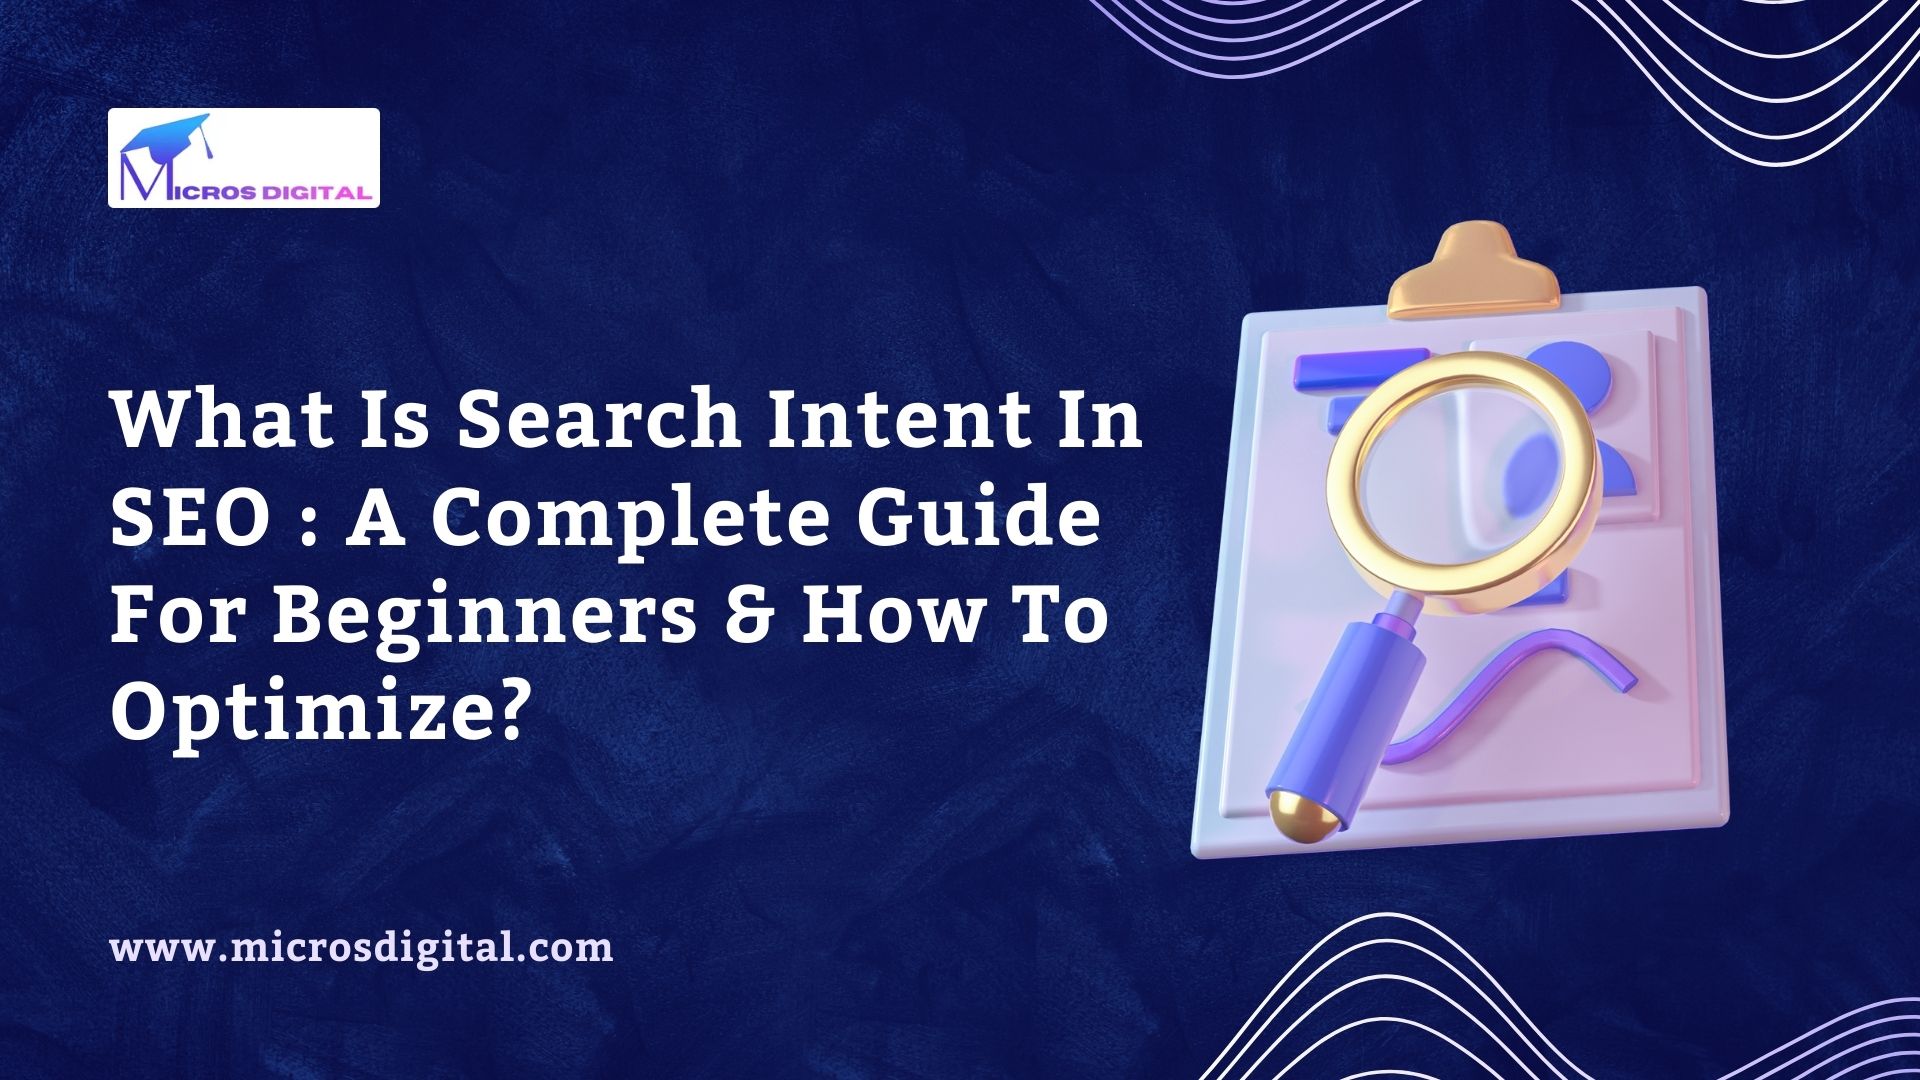 What Is Search Intent In SEO A Complete Guide For Beginners & How To Optimize